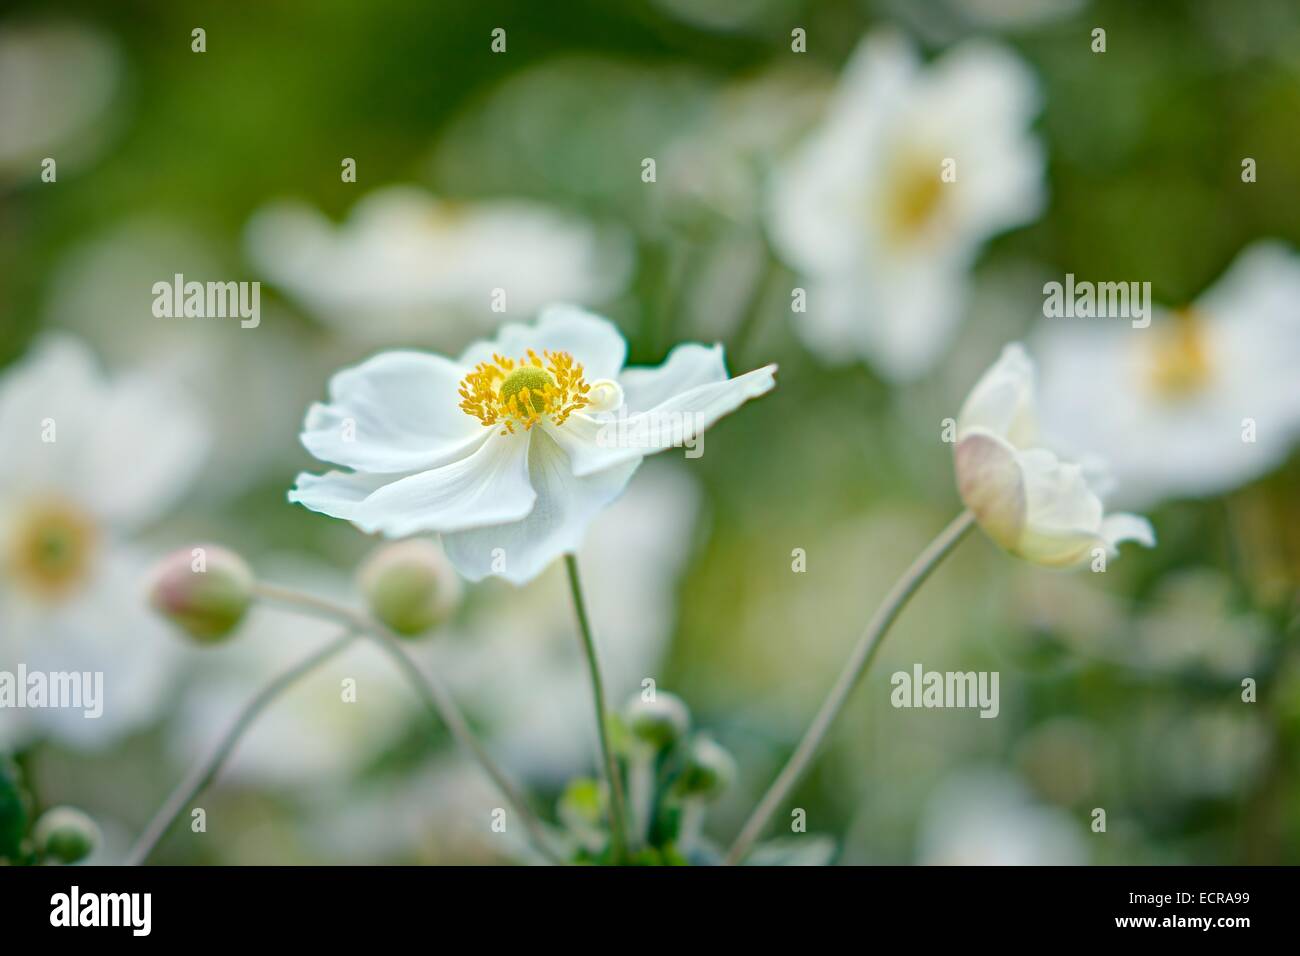 Single white border perennial Japanese Anemone, yellow stamen, against a blurred background of the garden full of White Anemone Stock Photo